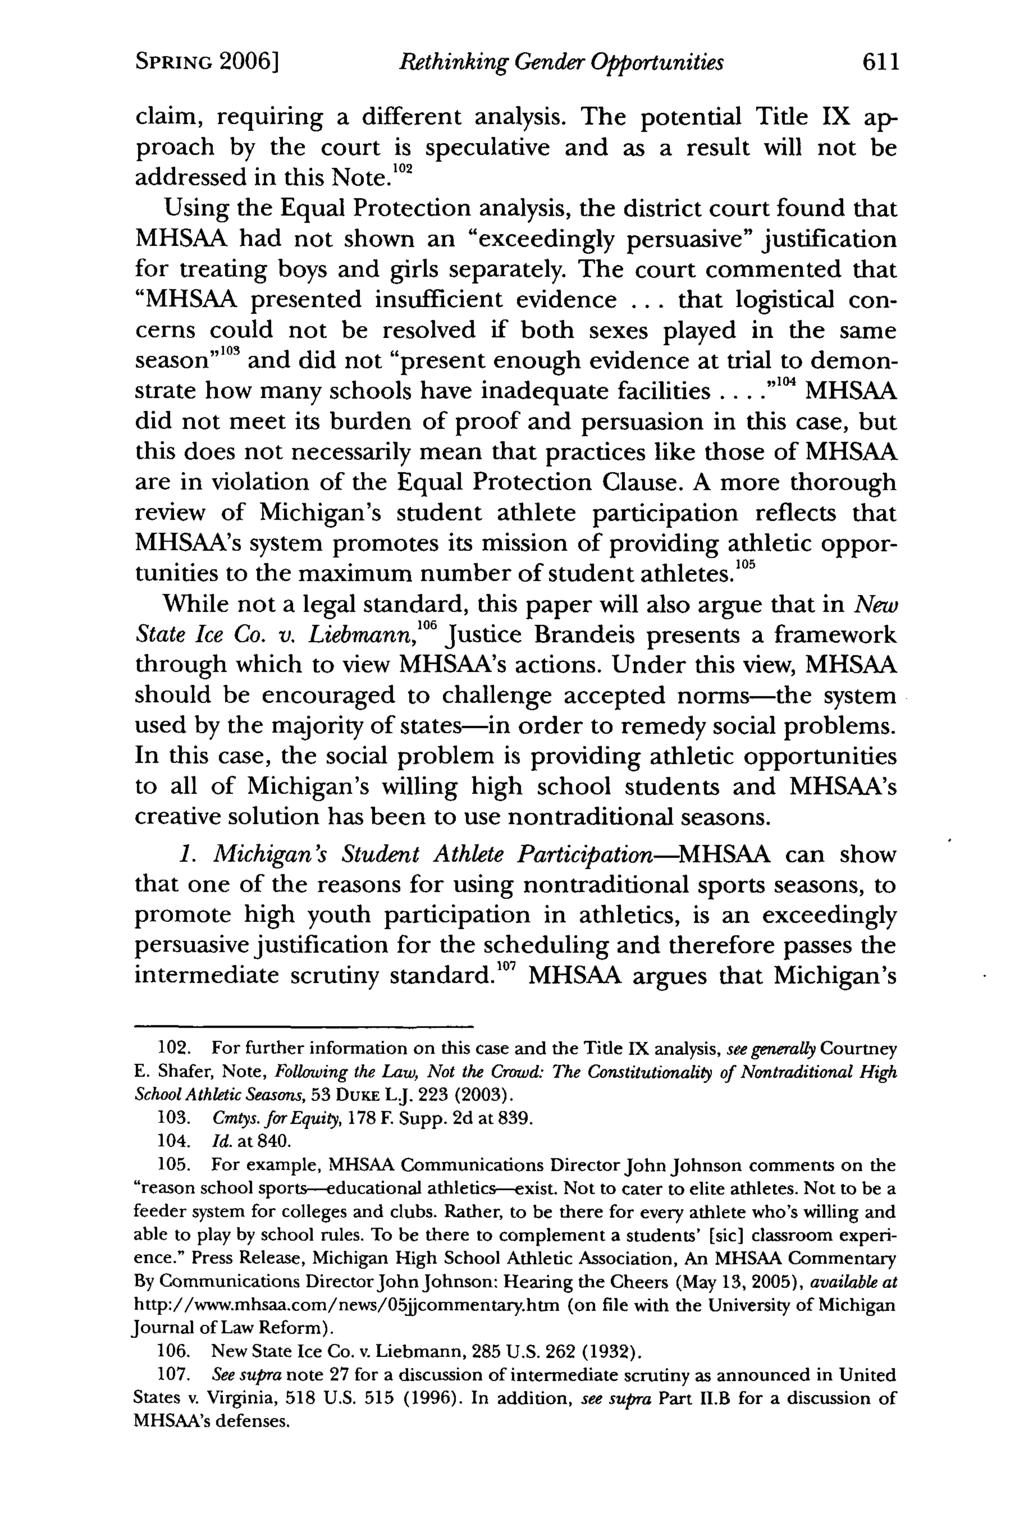 SPRING 2006] Rethinking Gender Opportunities claim, requiring a different analysis. The potential Title IX approach by the court is speculative and as a result will not be addressed in this Note.